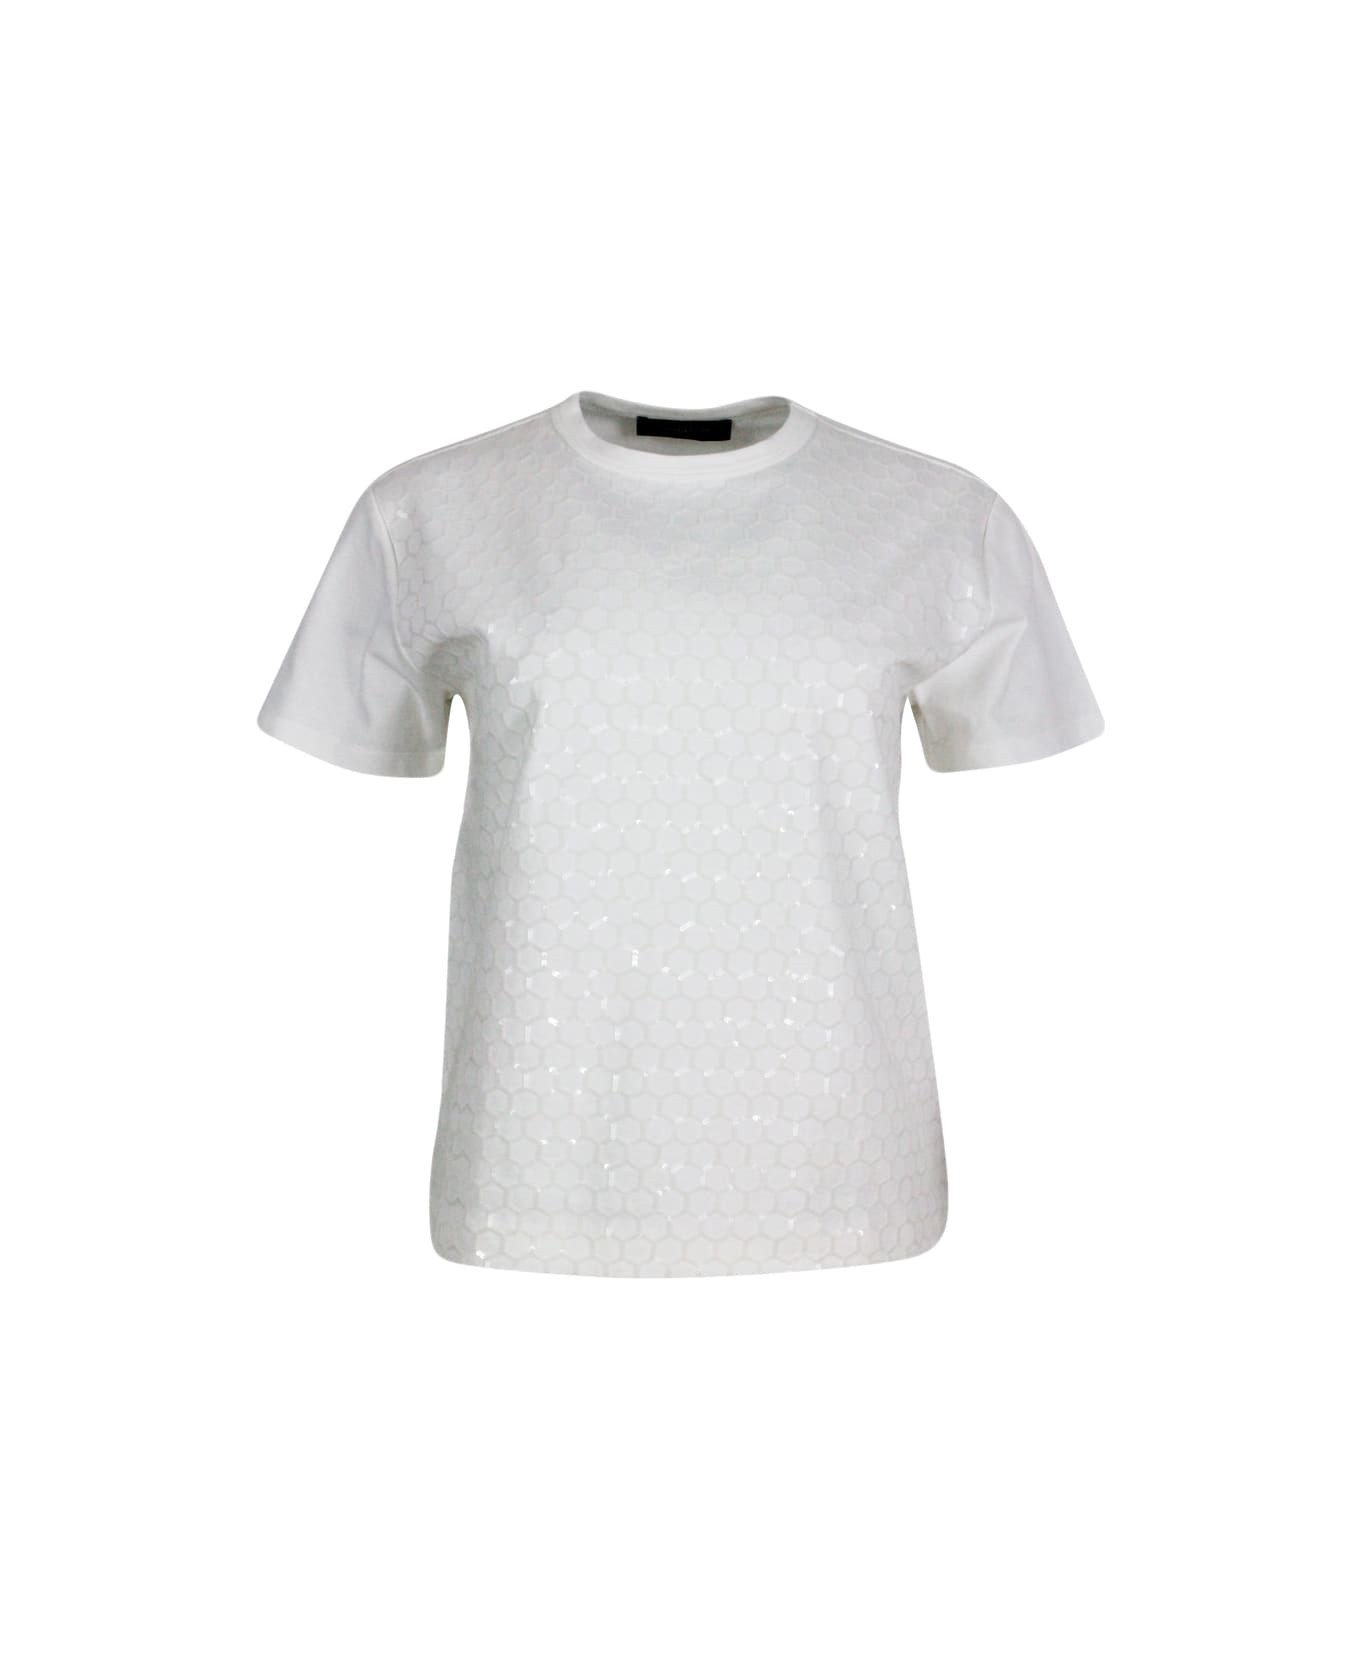 Fabiana Filippi Crew-neck, Short-sleeved T-shirt Made Of Soft Cotton Embellished With Sequin Applications That Give A Three-dimensional Effect To The Garment. - White Tシャツ